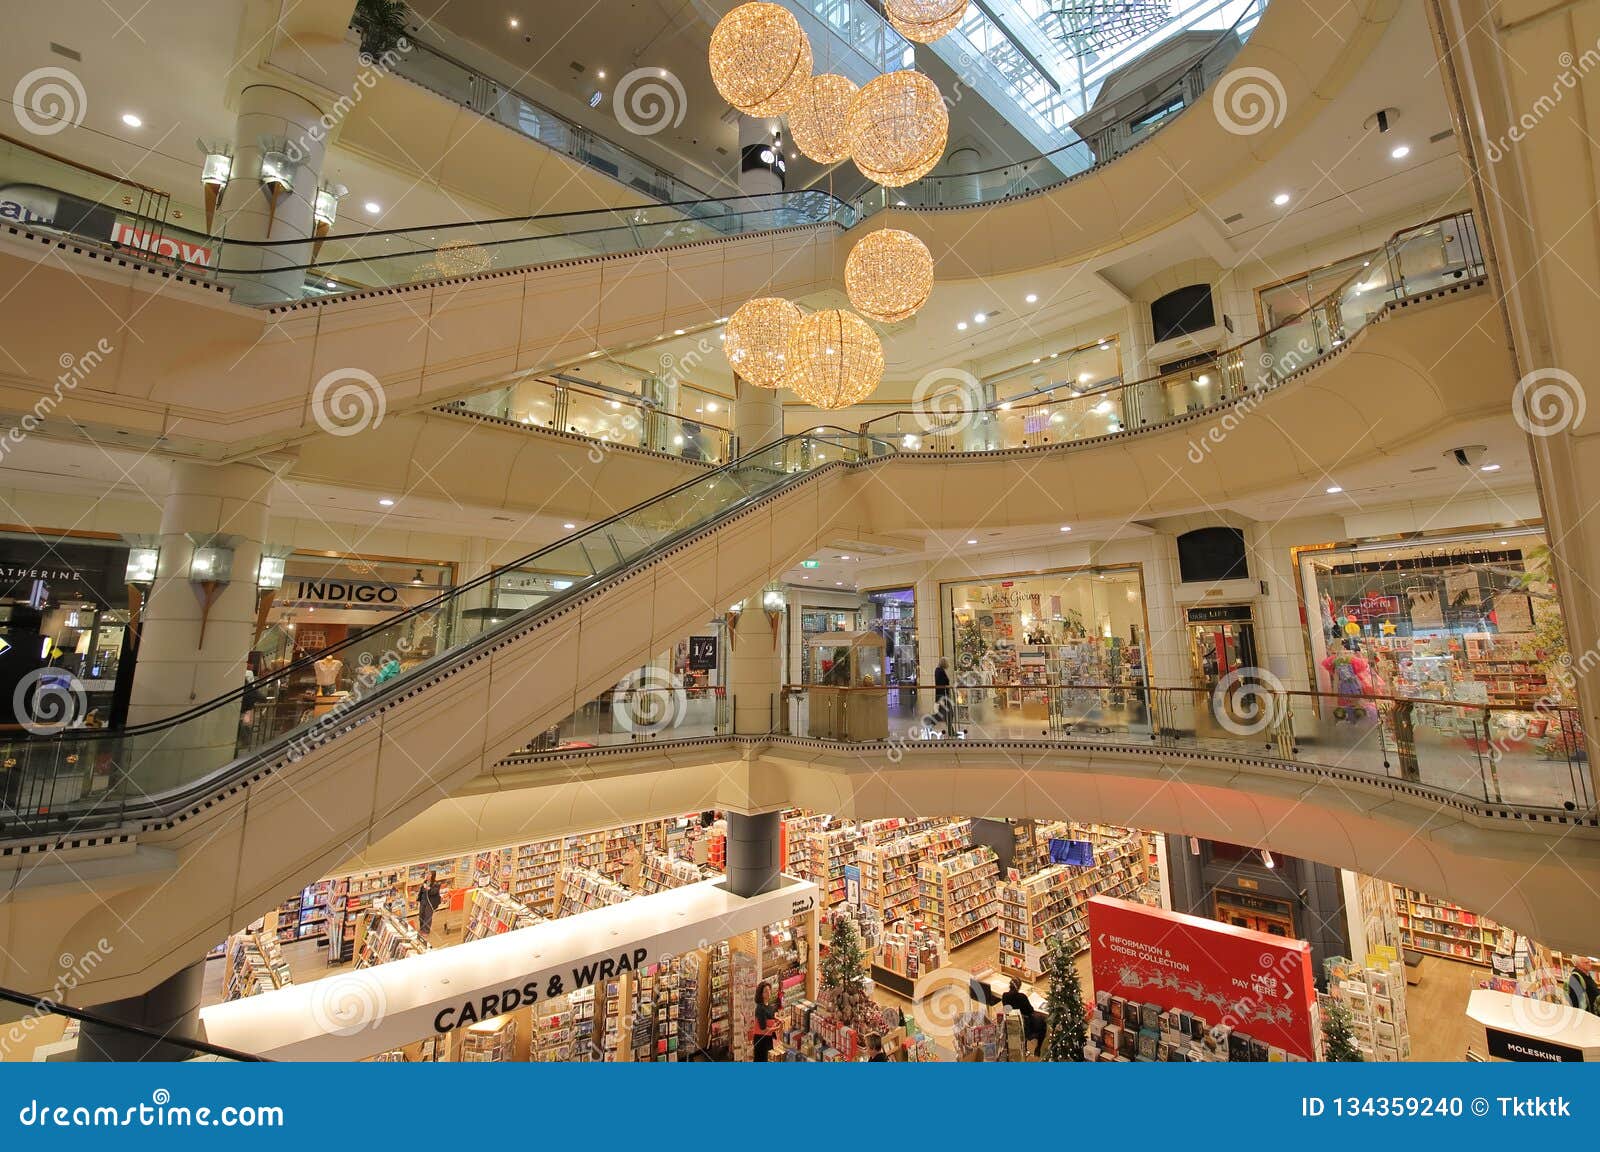 Shopping Mall Melbourne Australia Editorial Image - Image of building, urban: 134359240